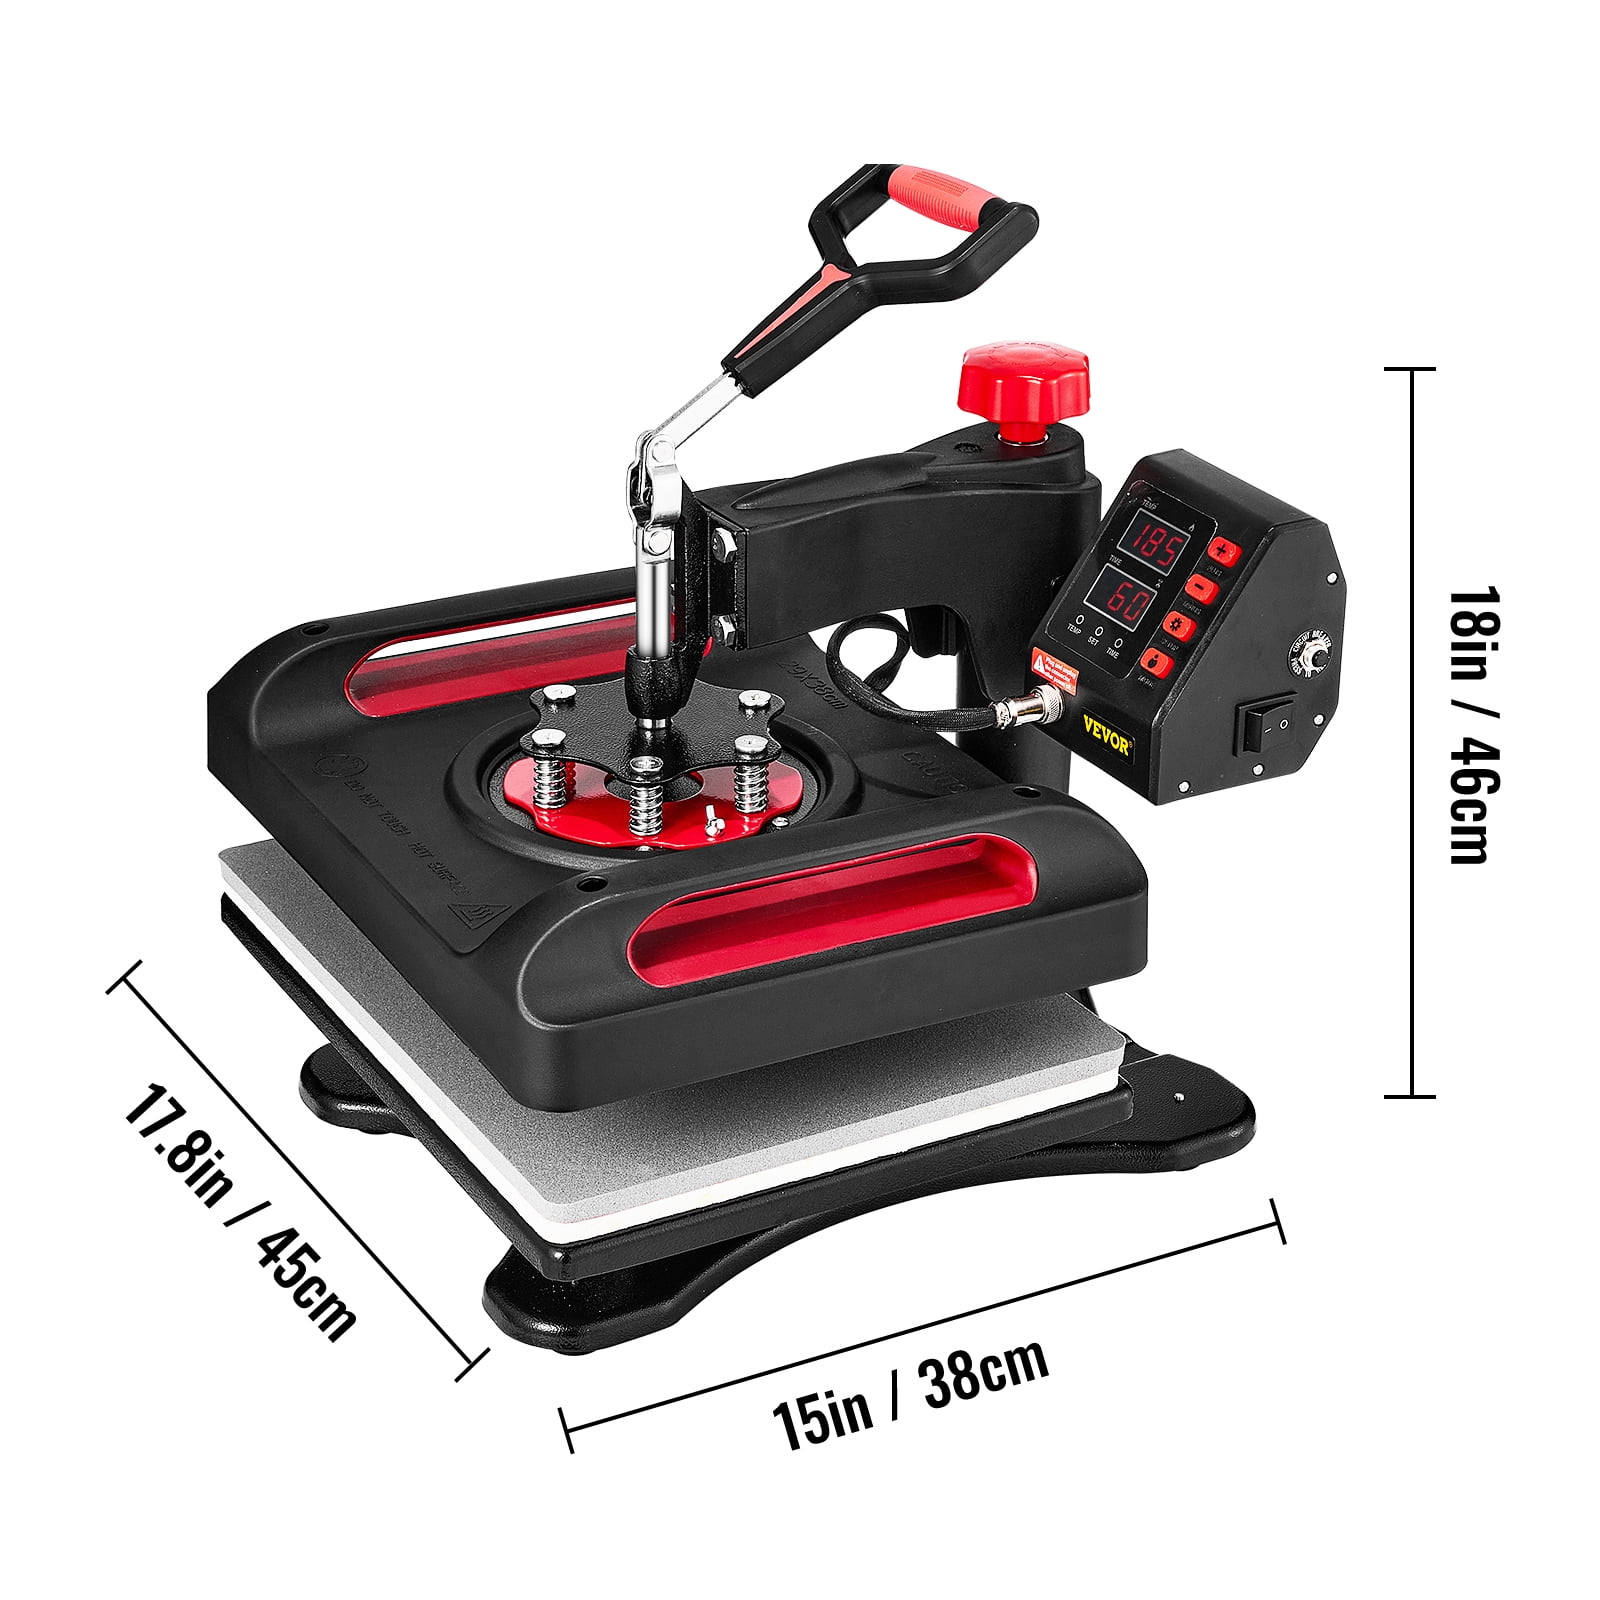 12 x 10inch Portable Iron T-shirt Heat Press Transfer Printing Machine With  Mug and Cap Heater, Free Giving 8 10 Plate Heating Pad $169.13